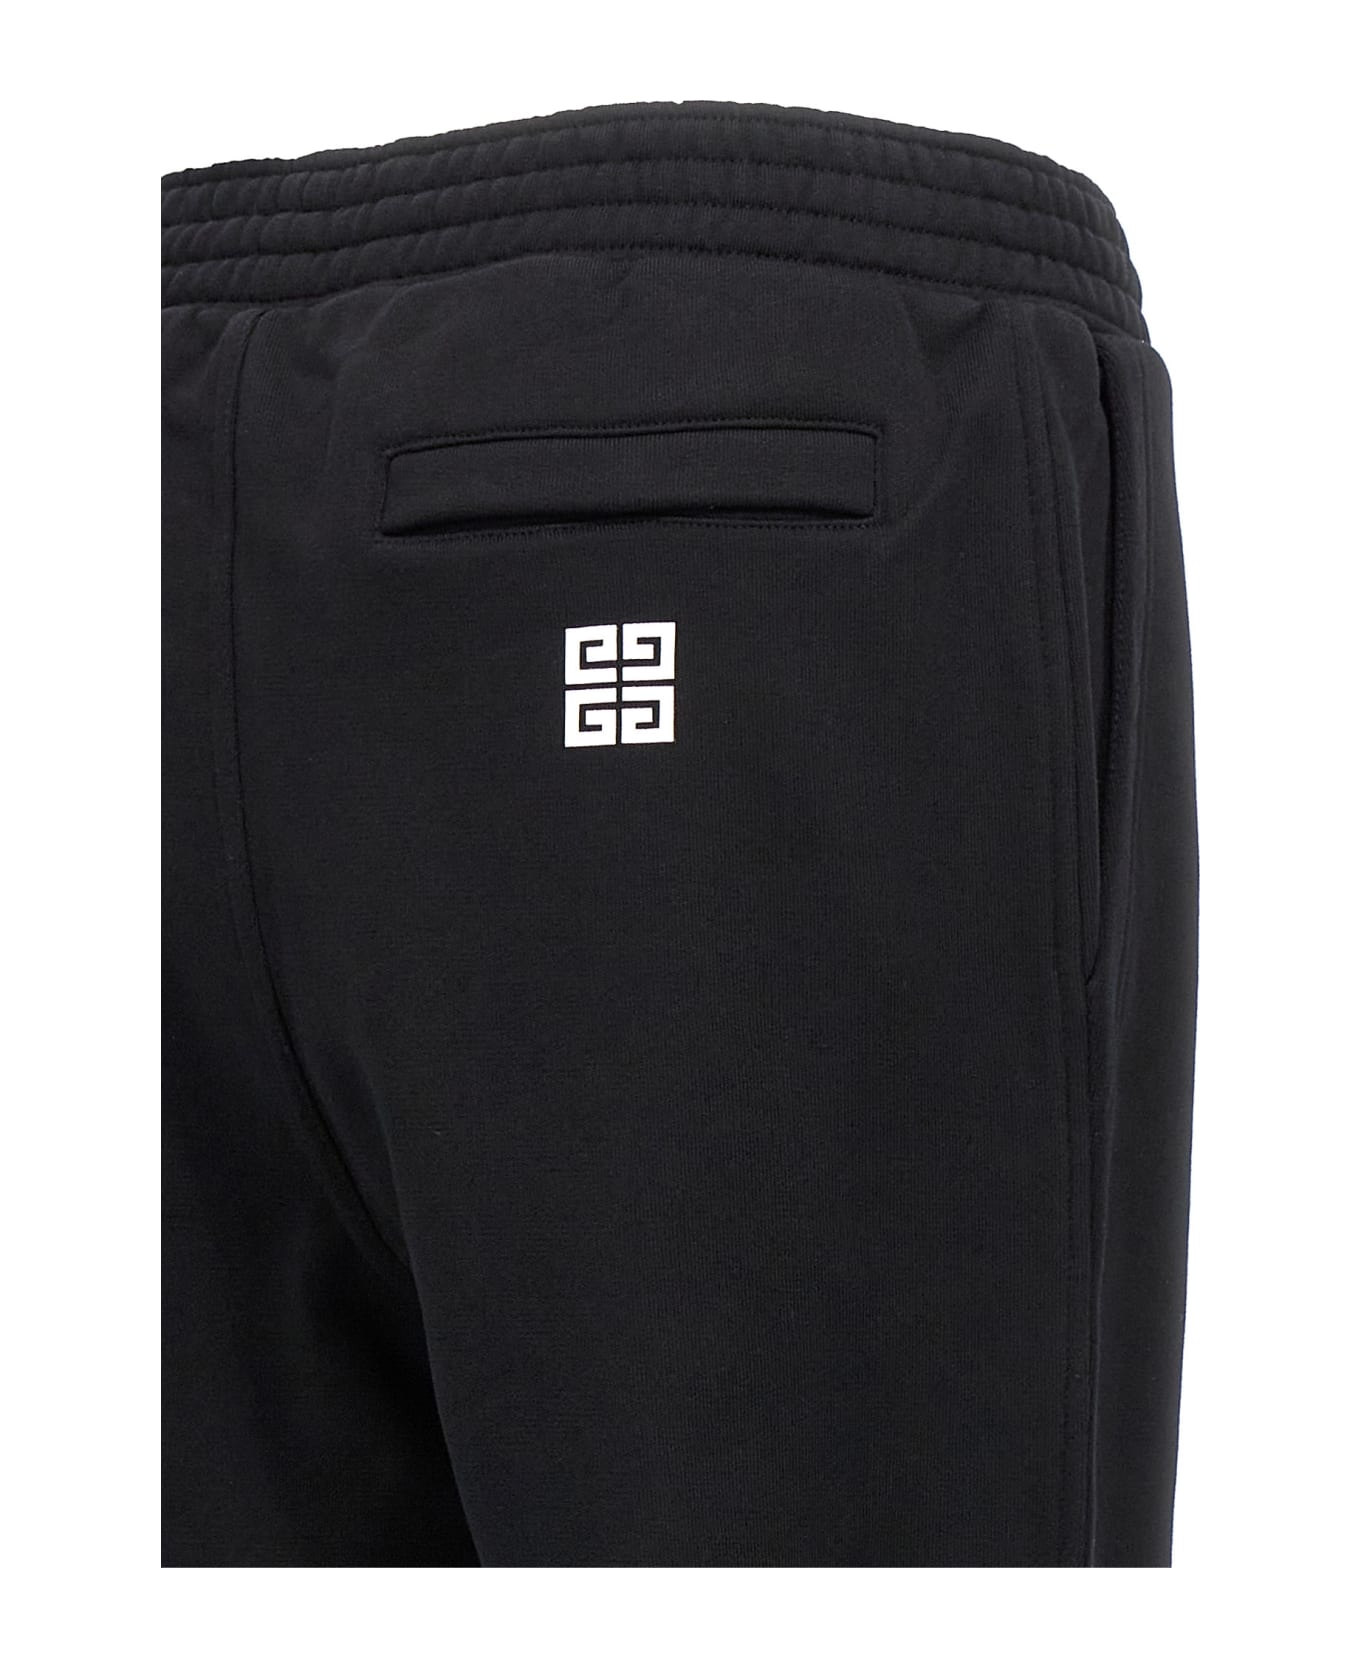 Givenchy Archetype Trousers - Black スウェットパンツ